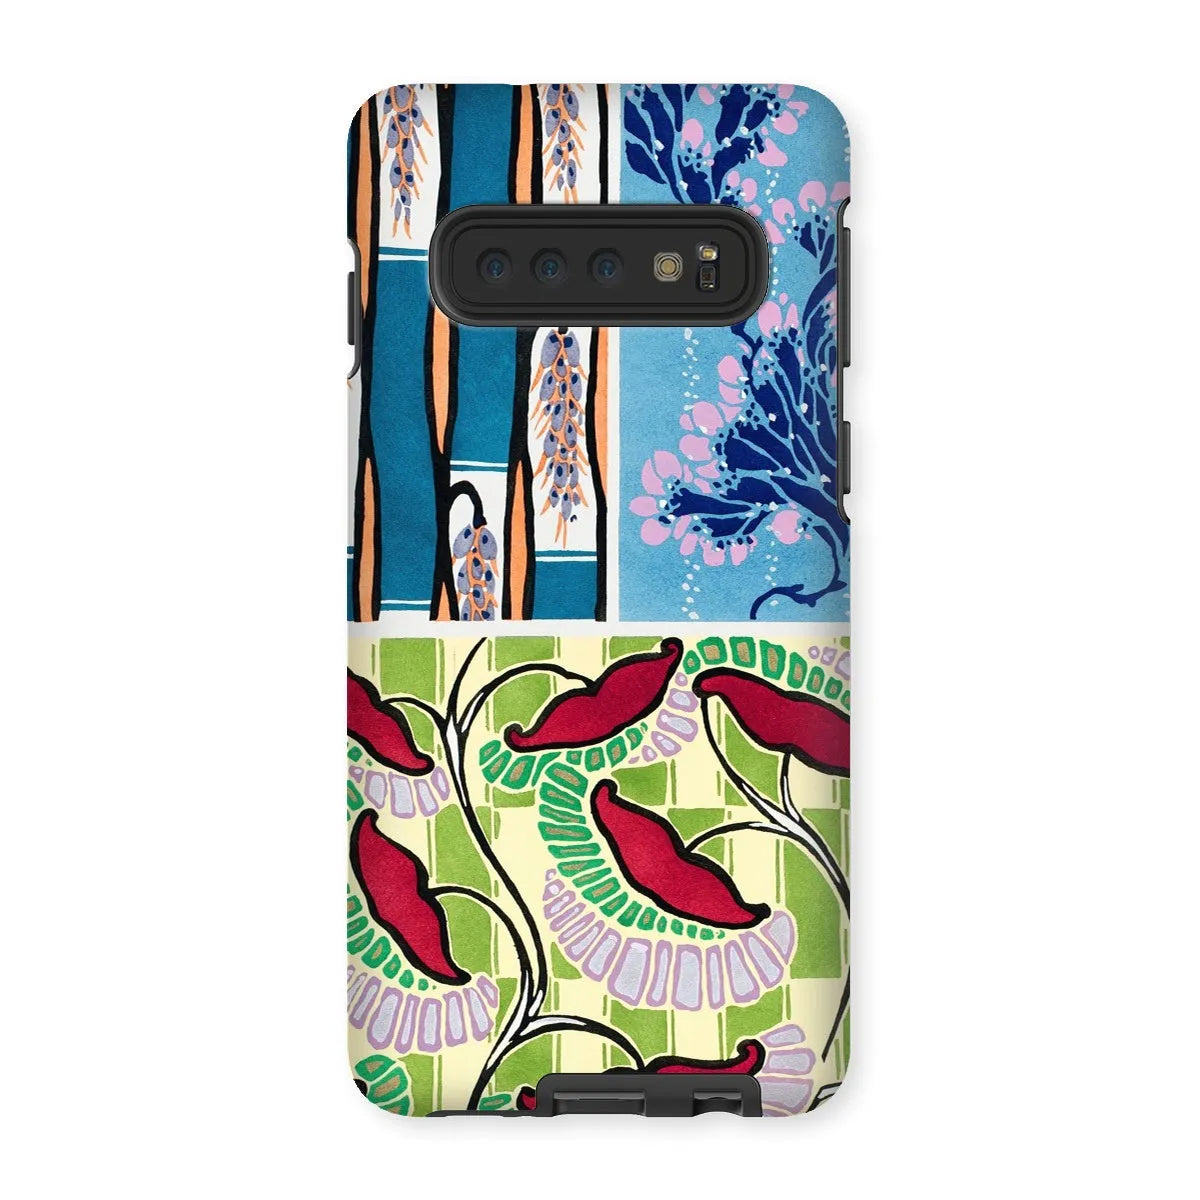 Floral Kitsch Aesthetic Art Phone Case - E.a. Séguy - Samsung Galaxy S10 / Matte - Mobile Phone Cases - Aesthetic Art